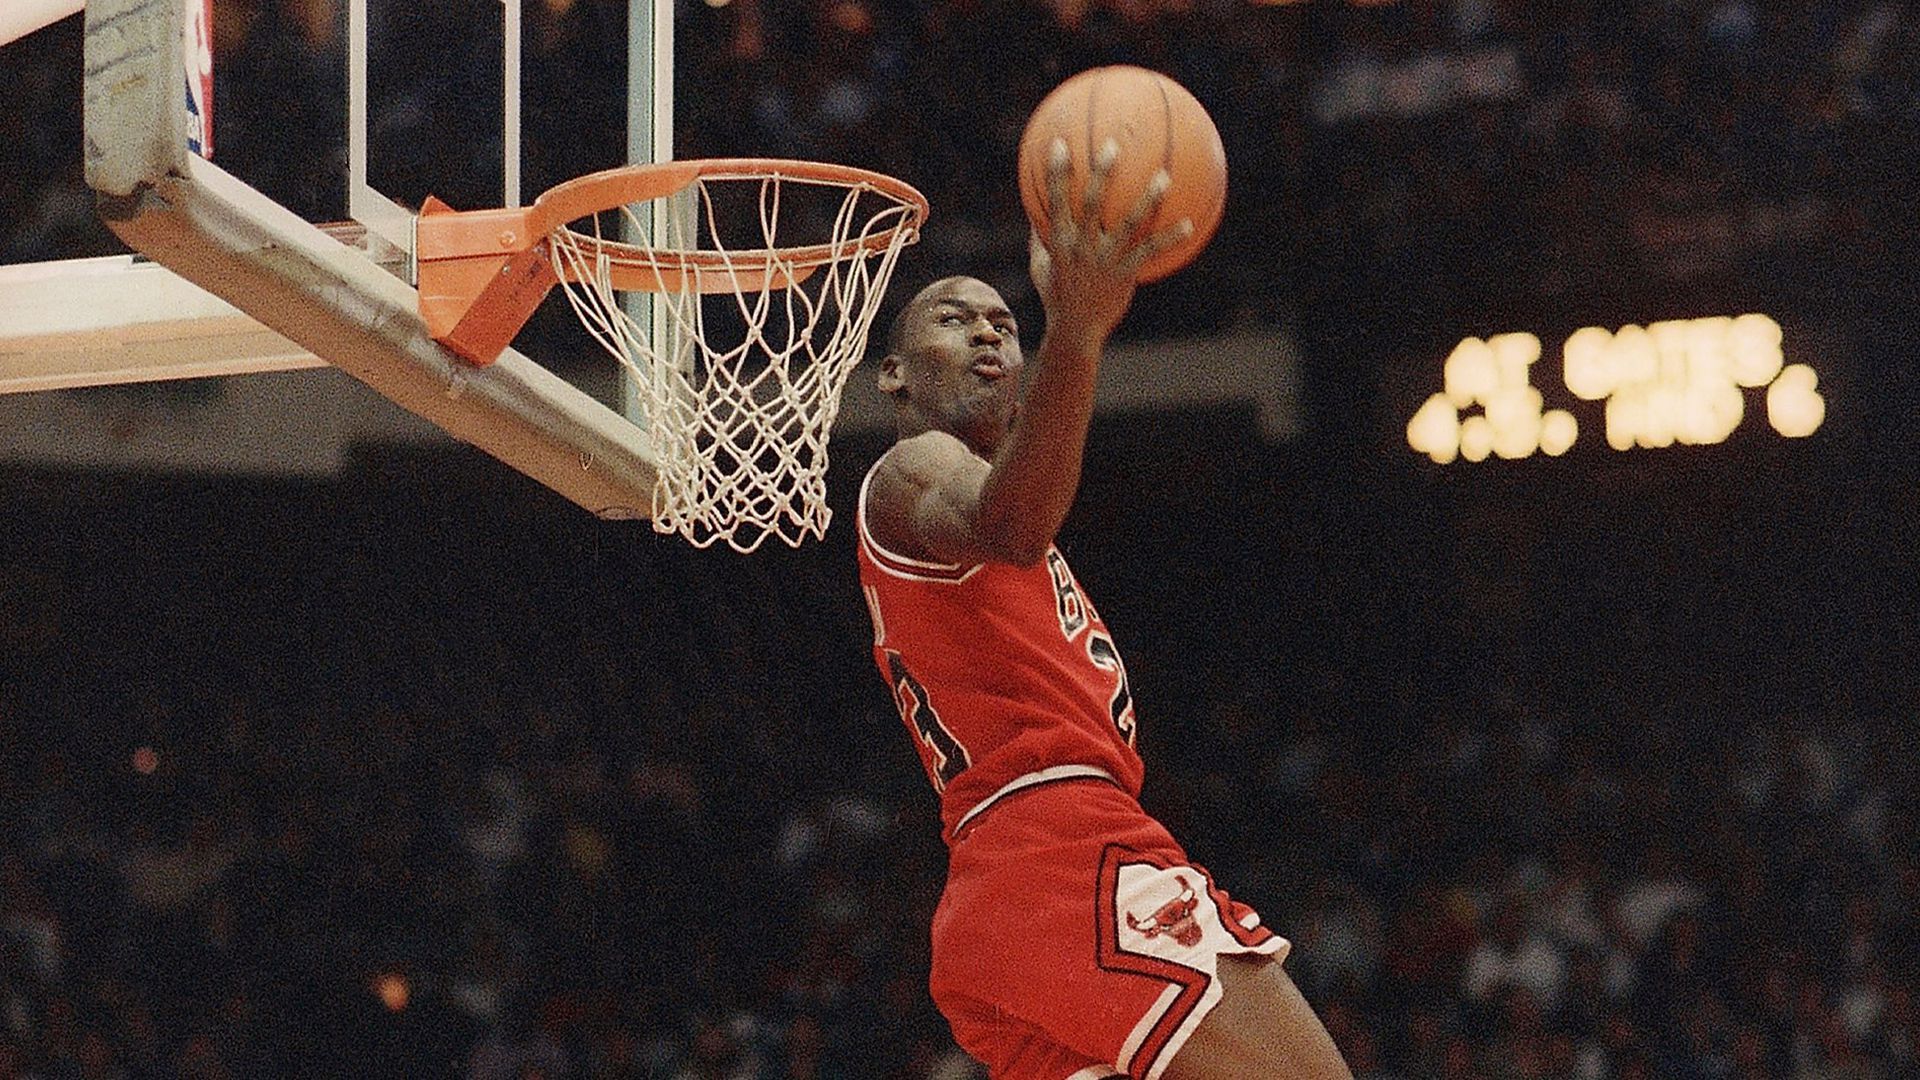 Bulls Talk Podcast: Who really won the 1988 Dunk Contest: Michael Jordan or Dominique Wilkins?